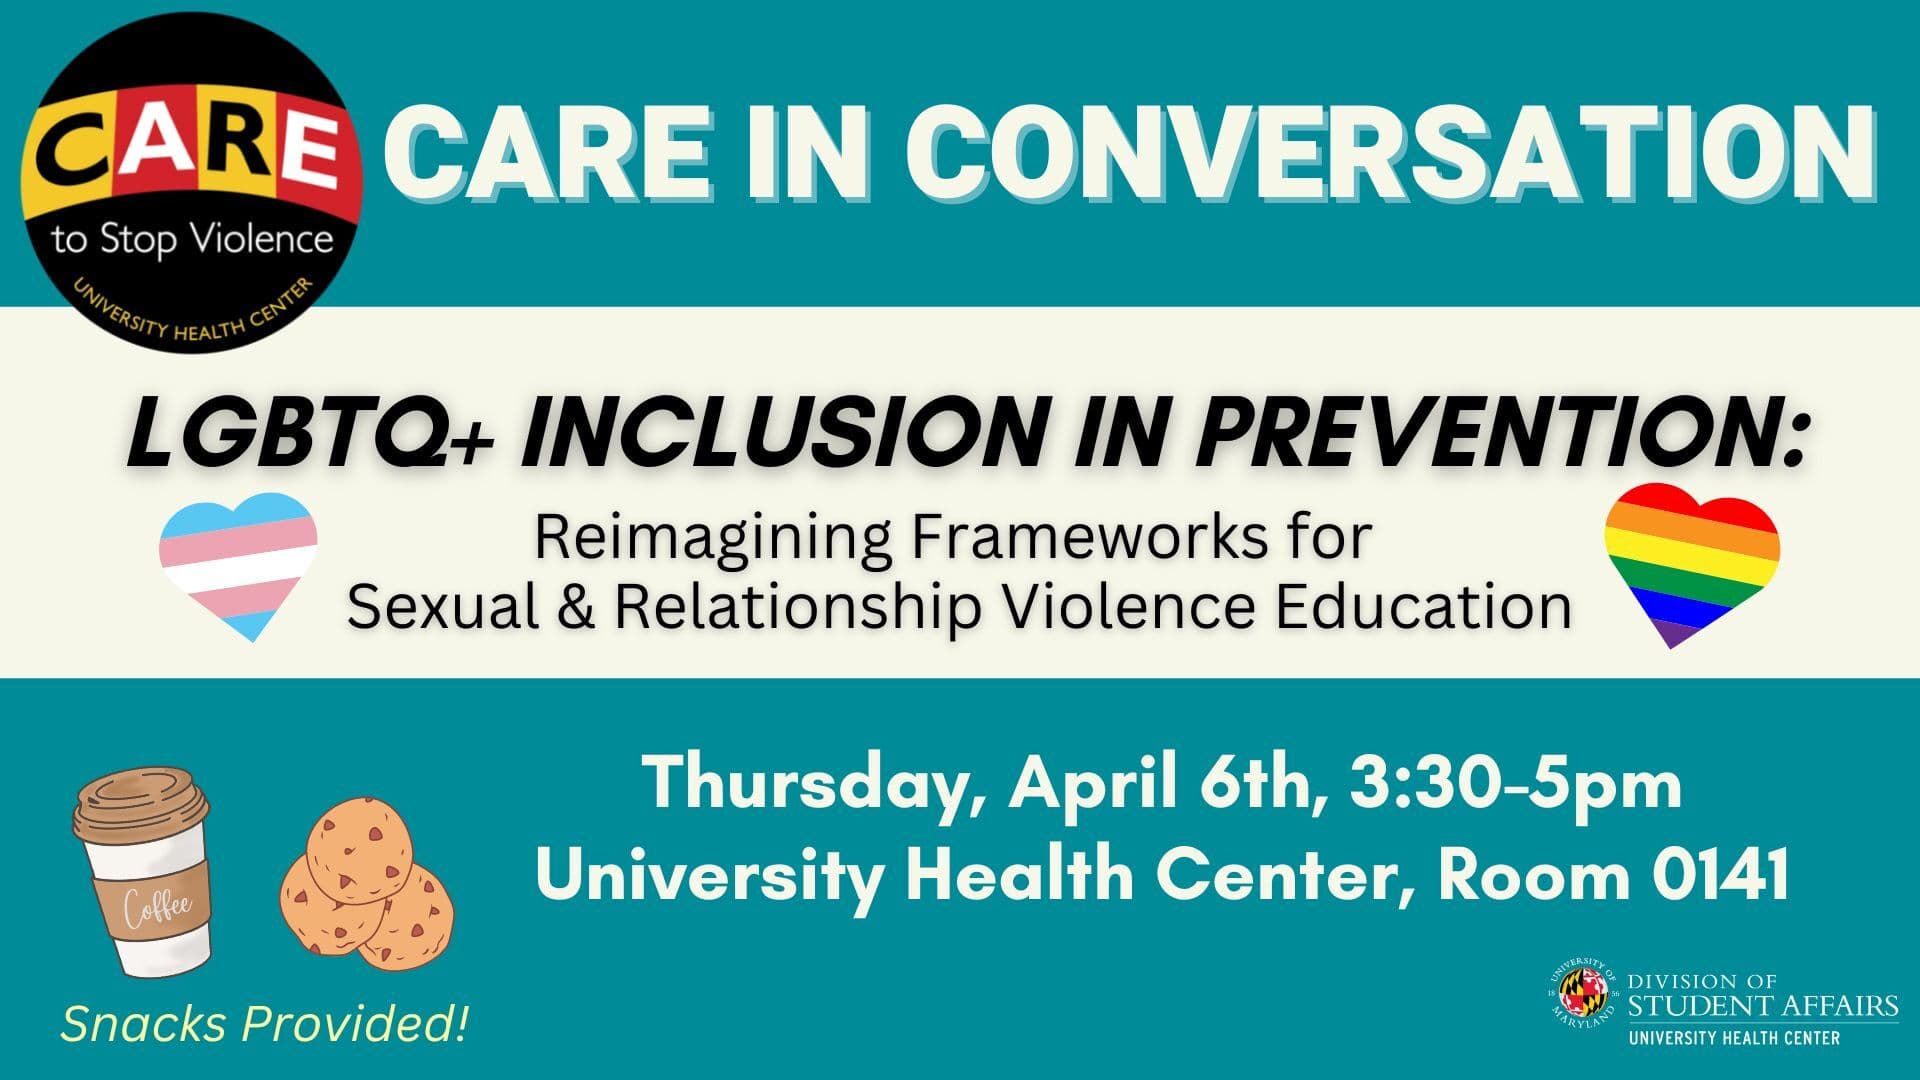 CARE in Conversation: LGBTQ+ Inclusivity in Prevention - Reimagining Frameworks for Sexual & Relationship Violence Education